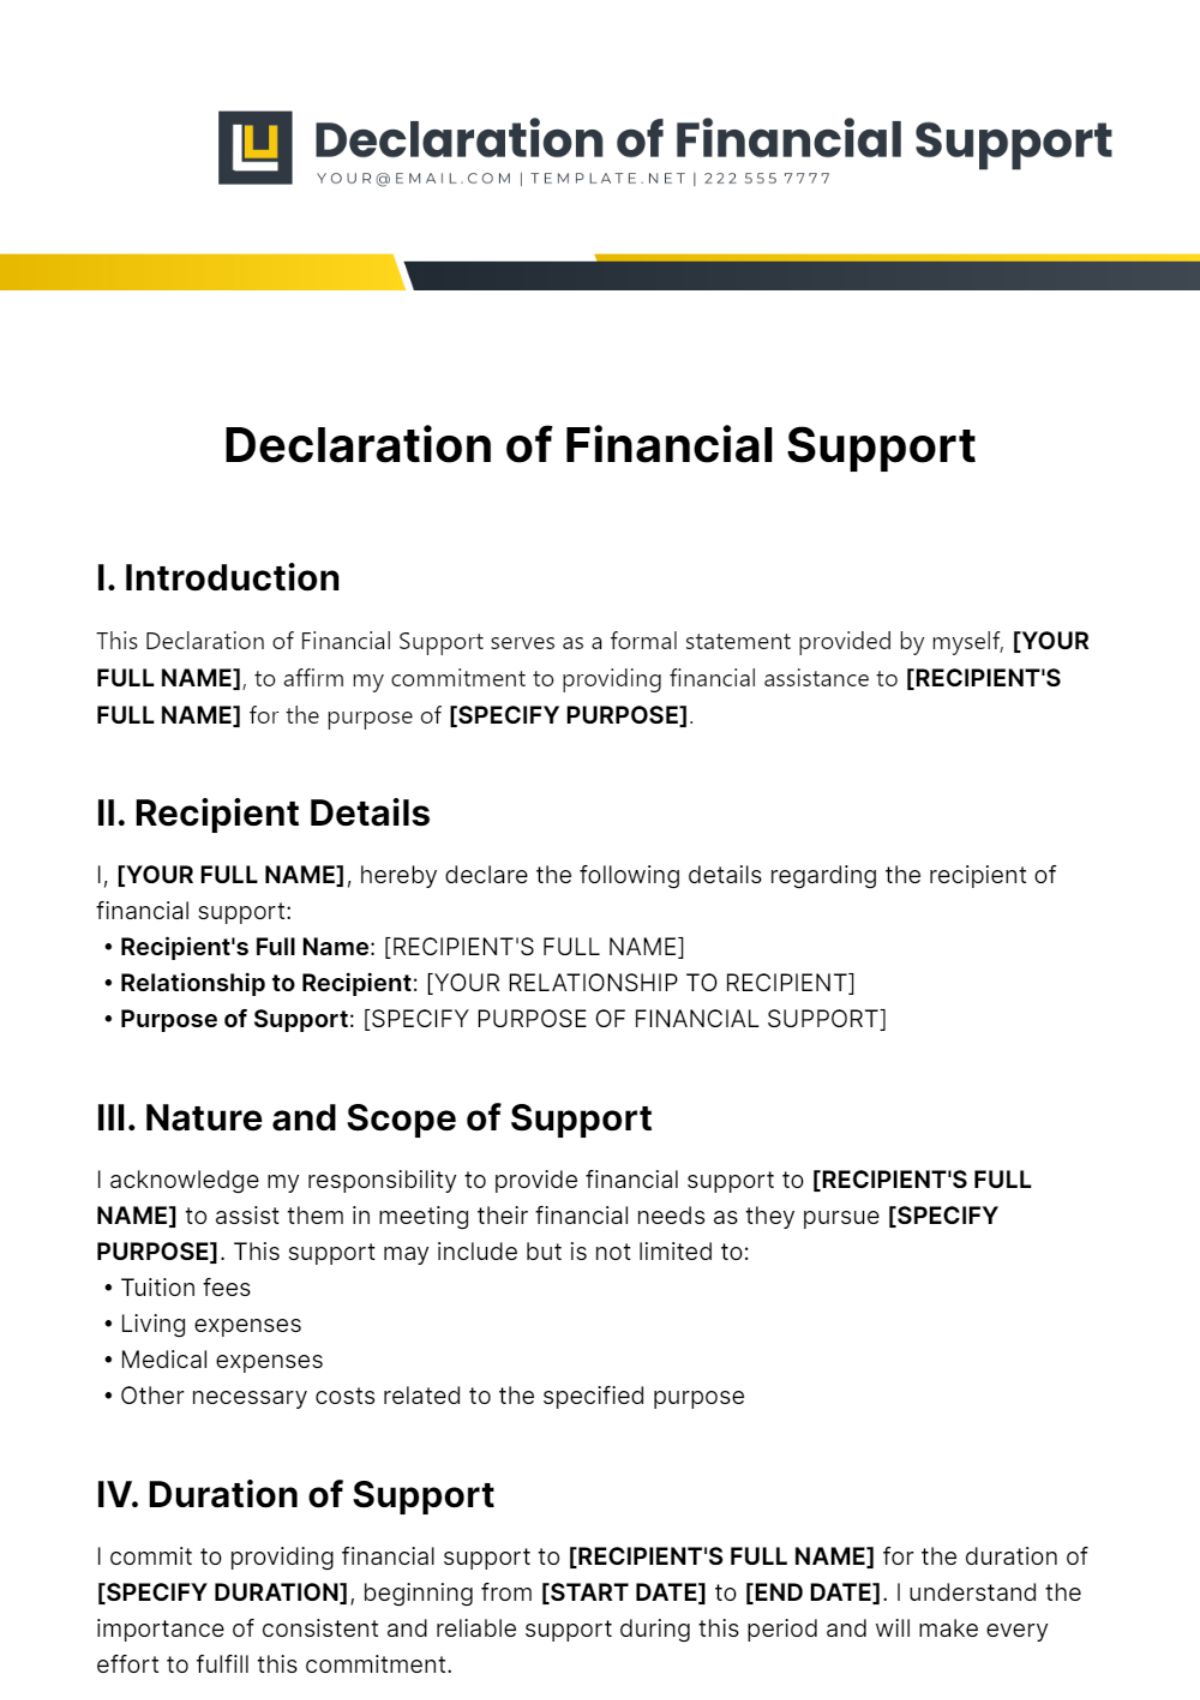 Declaration of Financial Support Template